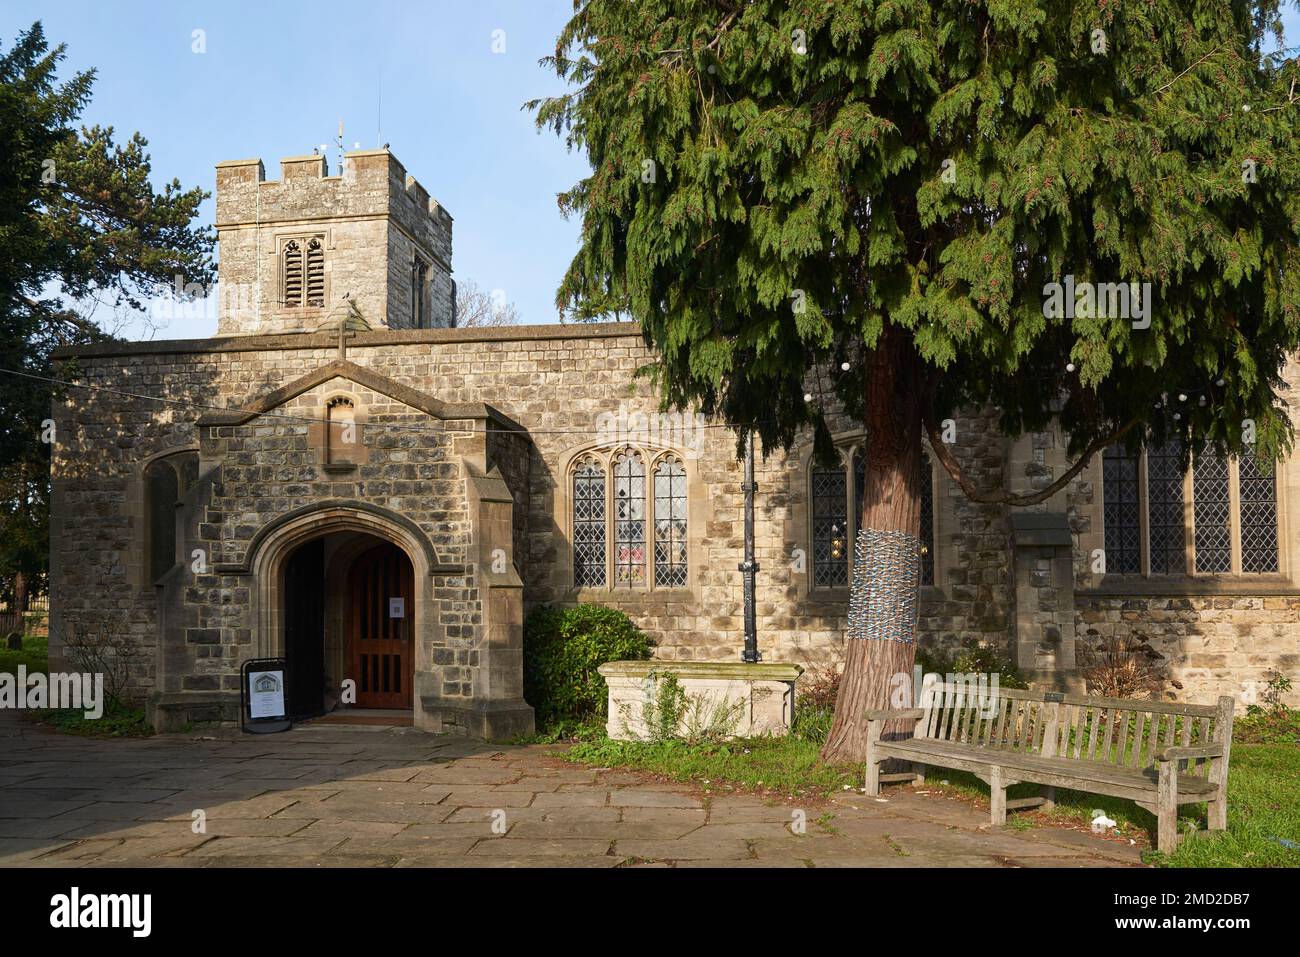 The exterior and entrance of St Mary-at-Finchley church, North London UK, with 15th century tower Stock Photo